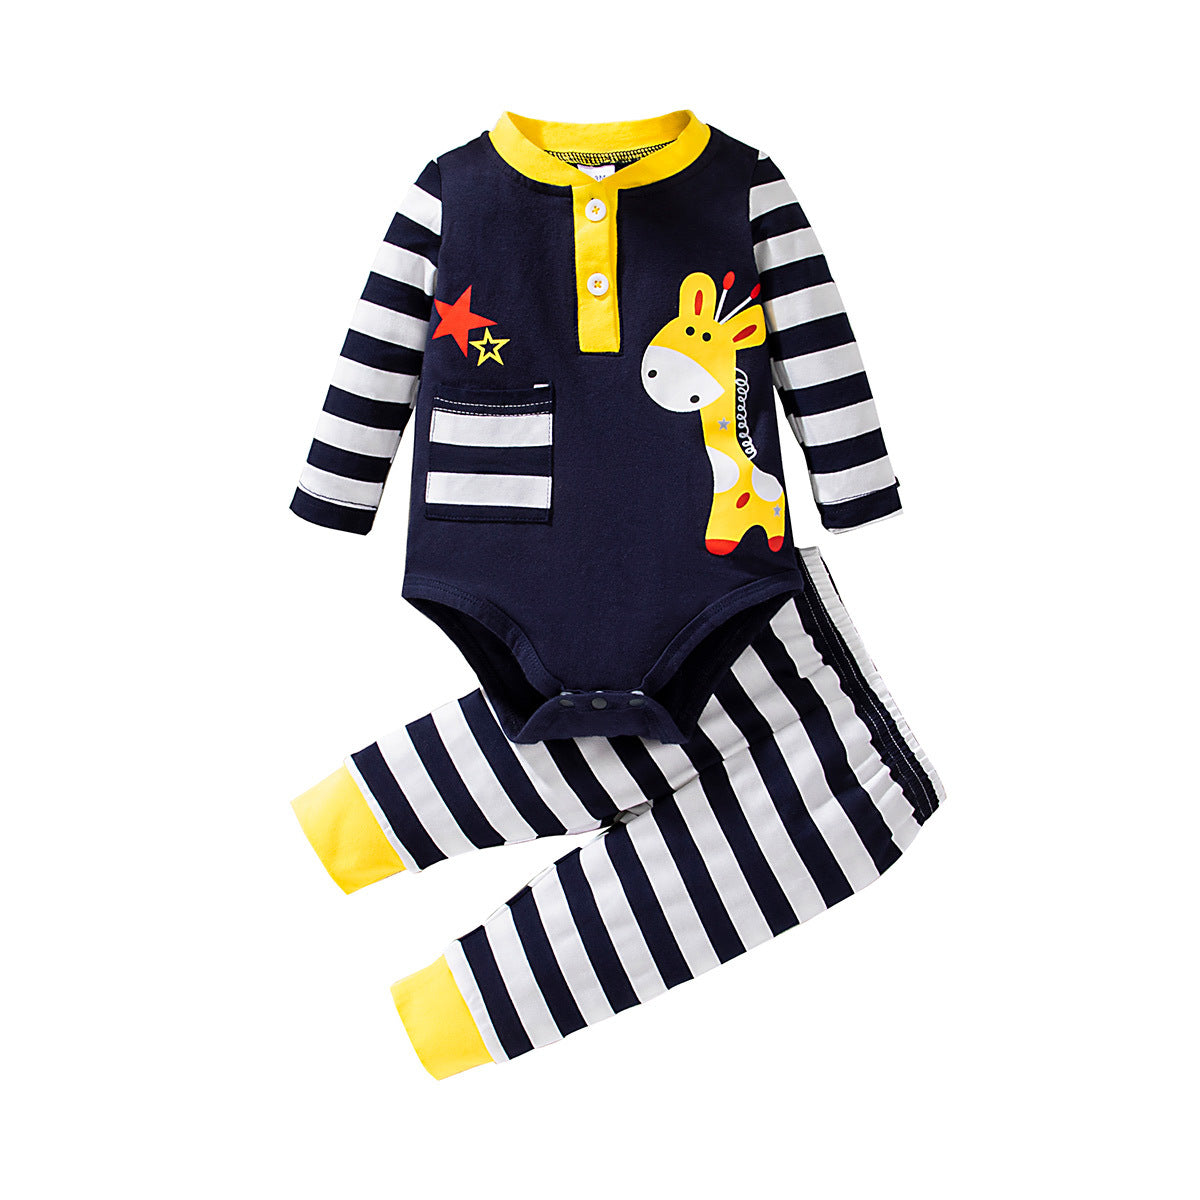 Cute Striped Giraffe Infant Baby Clothes Set for Autumn